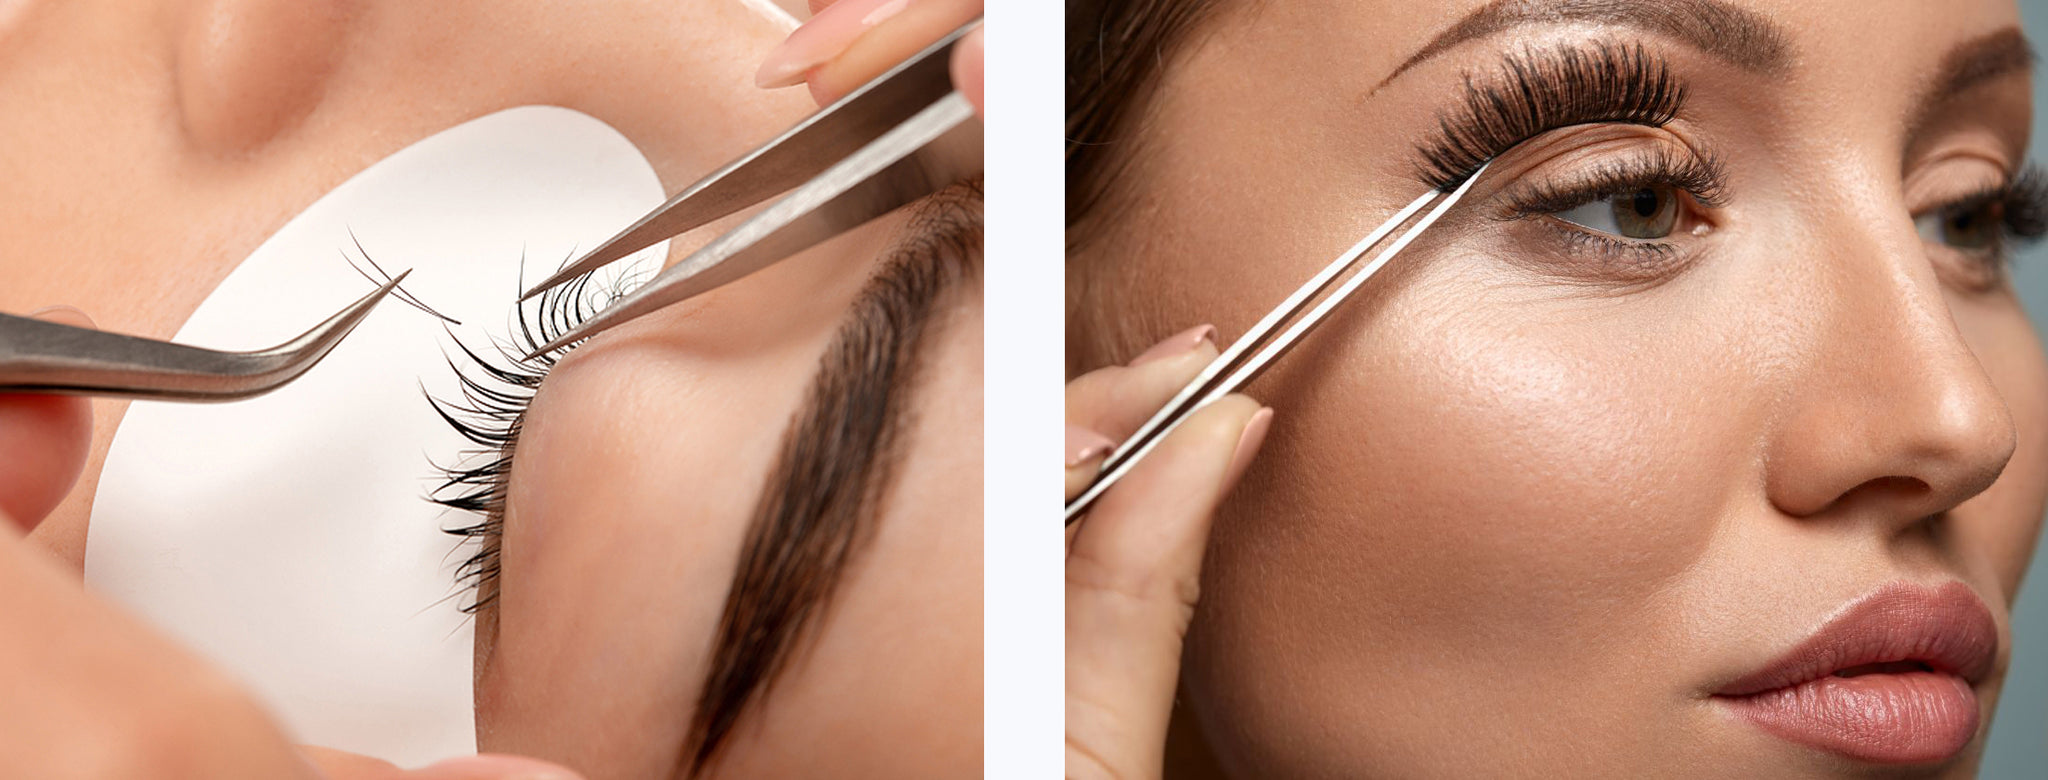 Comparison of Strip Lashes and Lash Extensions: On the right, a hand holding a strip lash against a natural eyelash. On the left, a lash extensions is beautifully applied to enhance the natural lashes